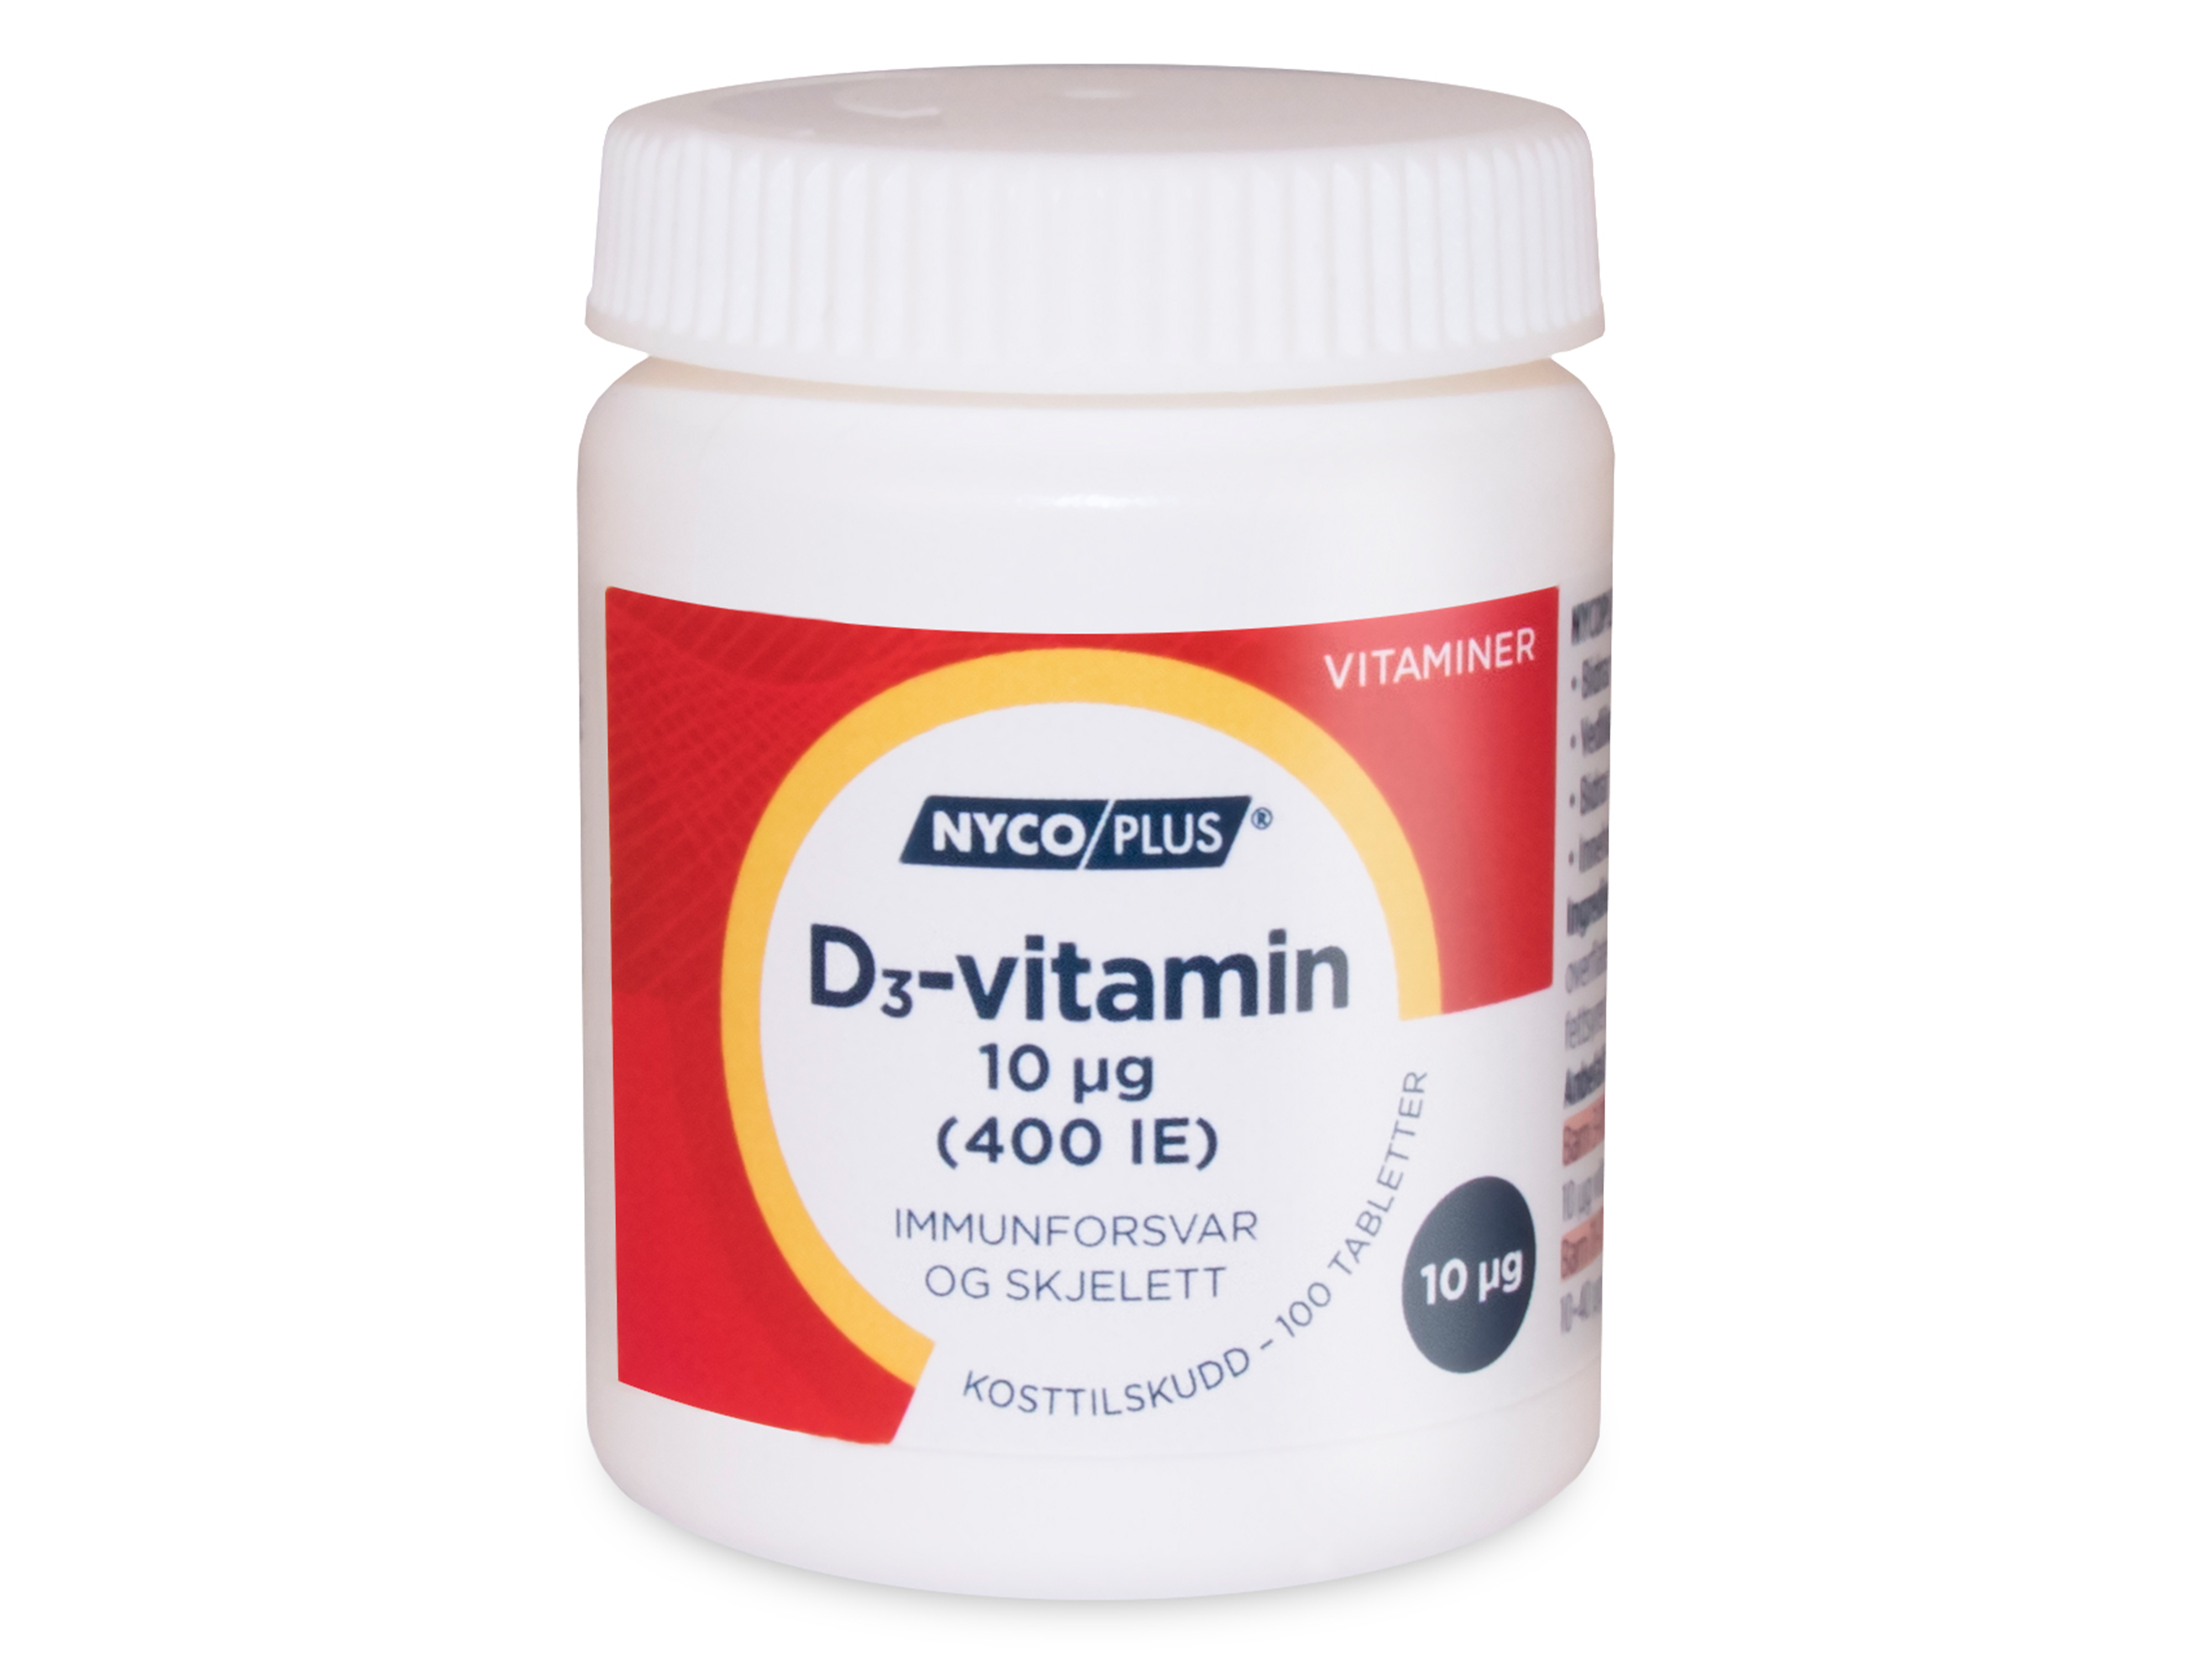 Nycoplus D-vitamin 10 µg, 100 tabletter